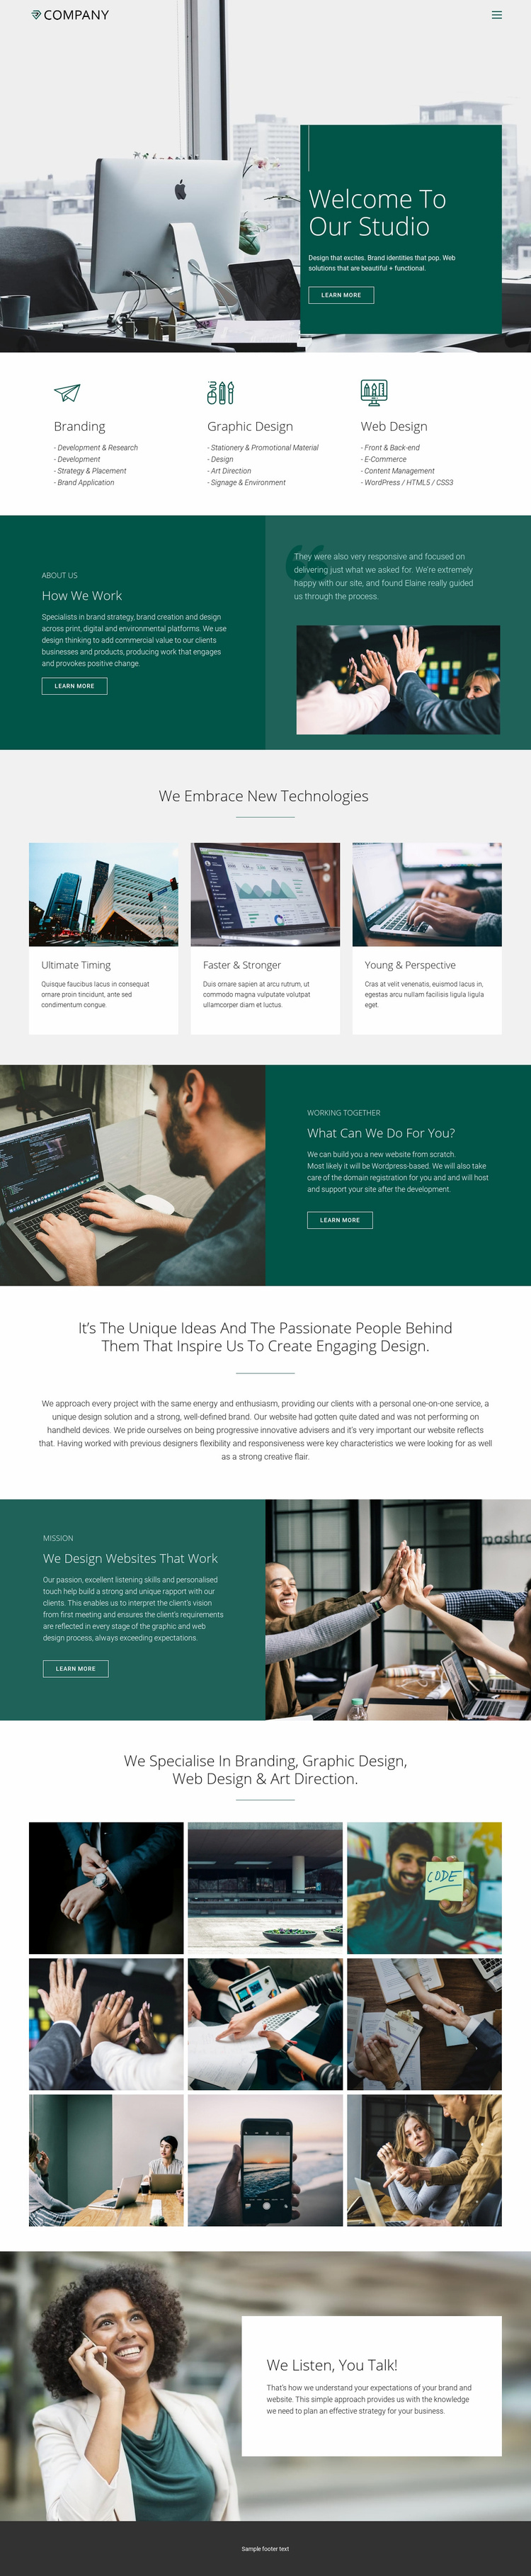 Trusty relations in business Wix Template Alternative